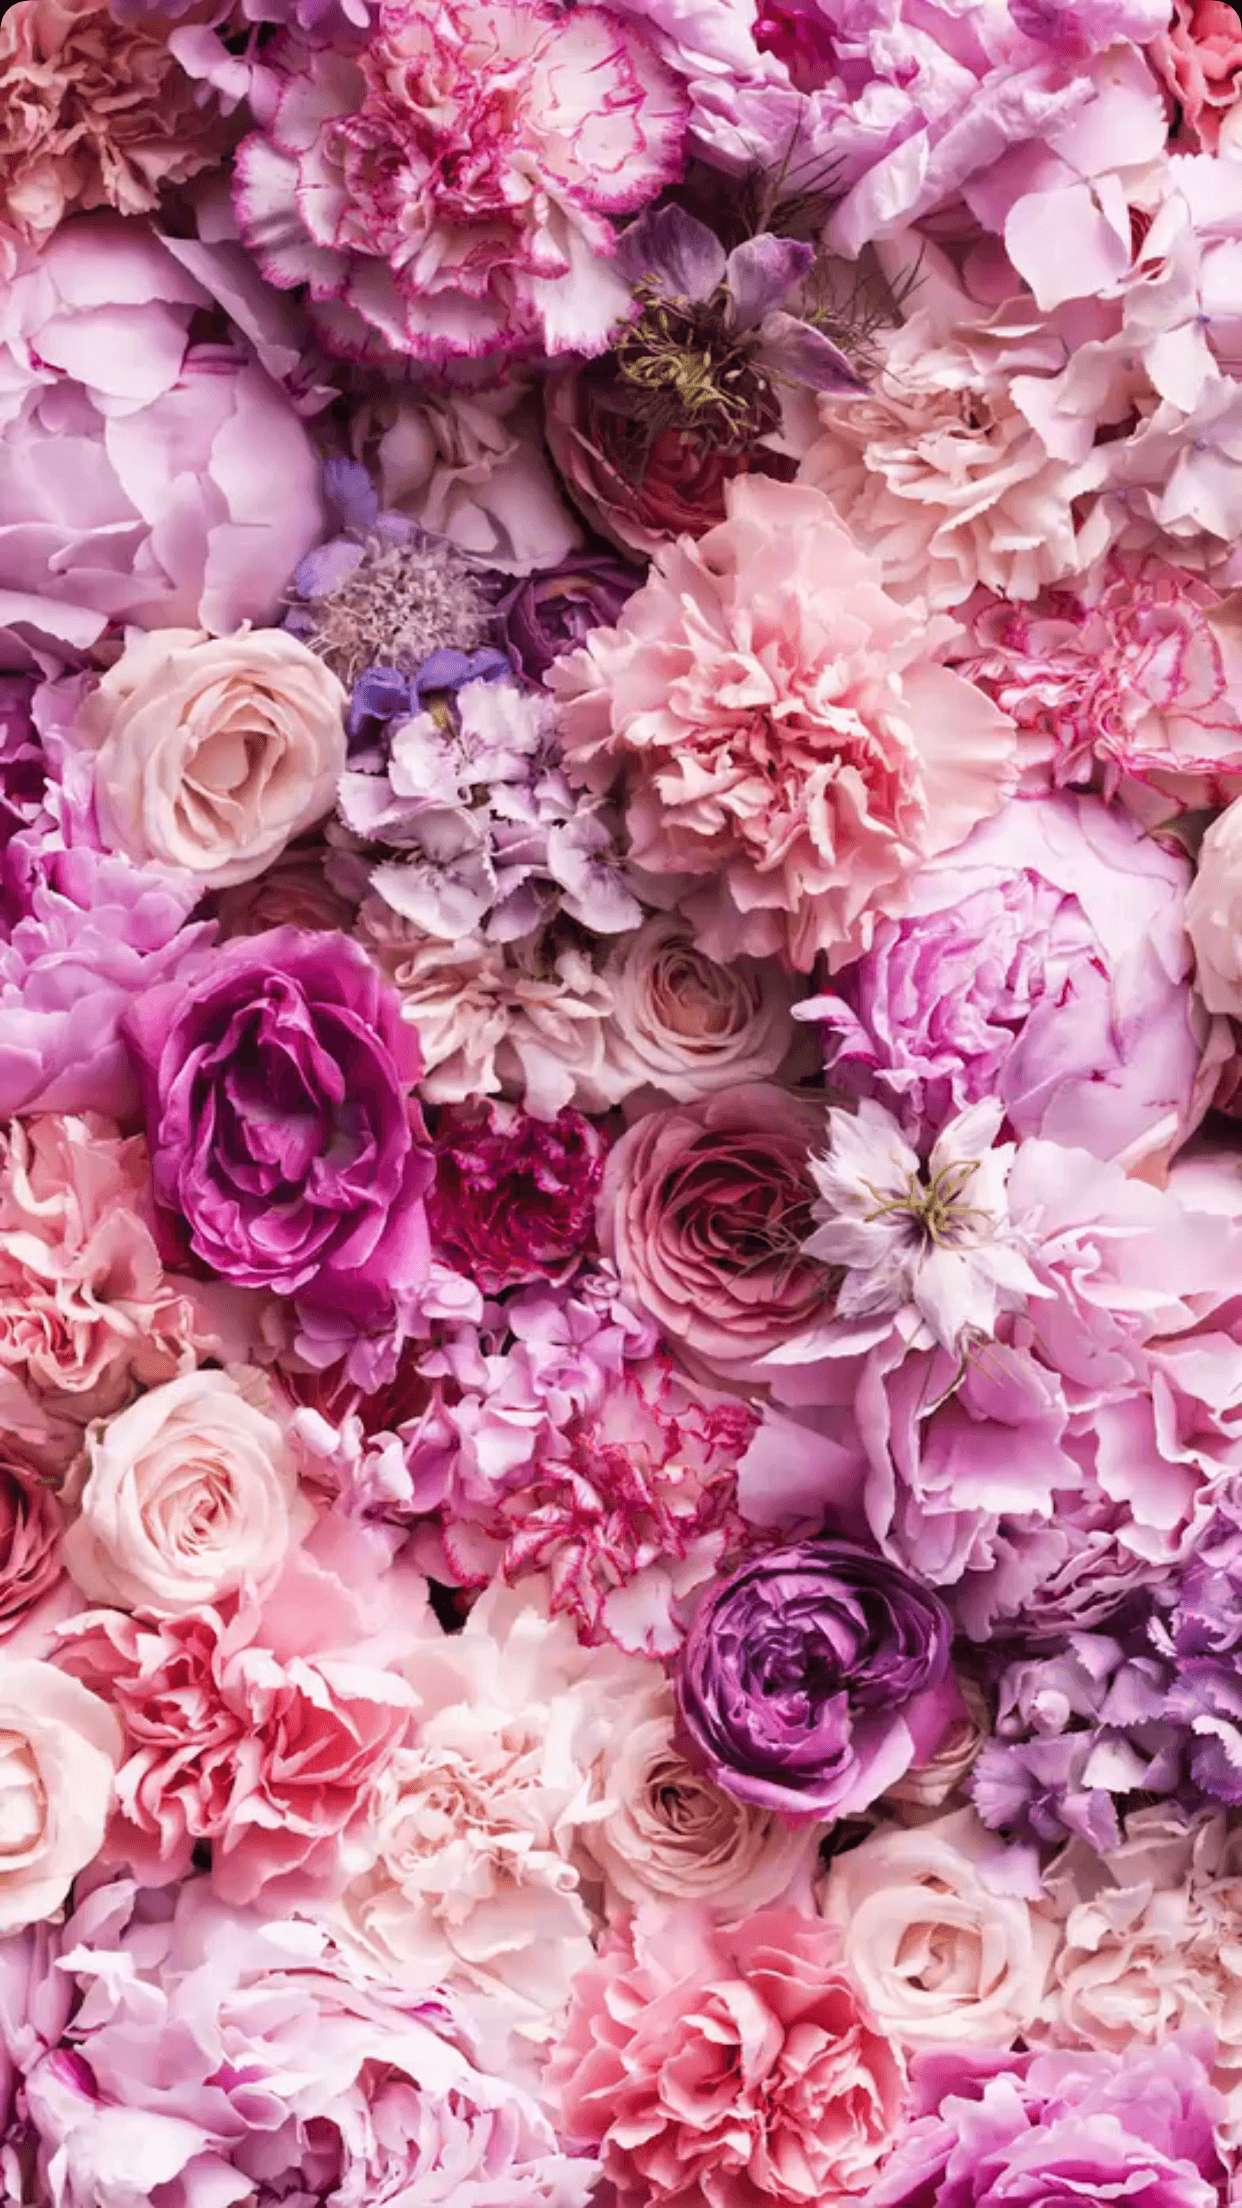 Floating roses wallpaper pink by xRebelYellx on DeviantArt